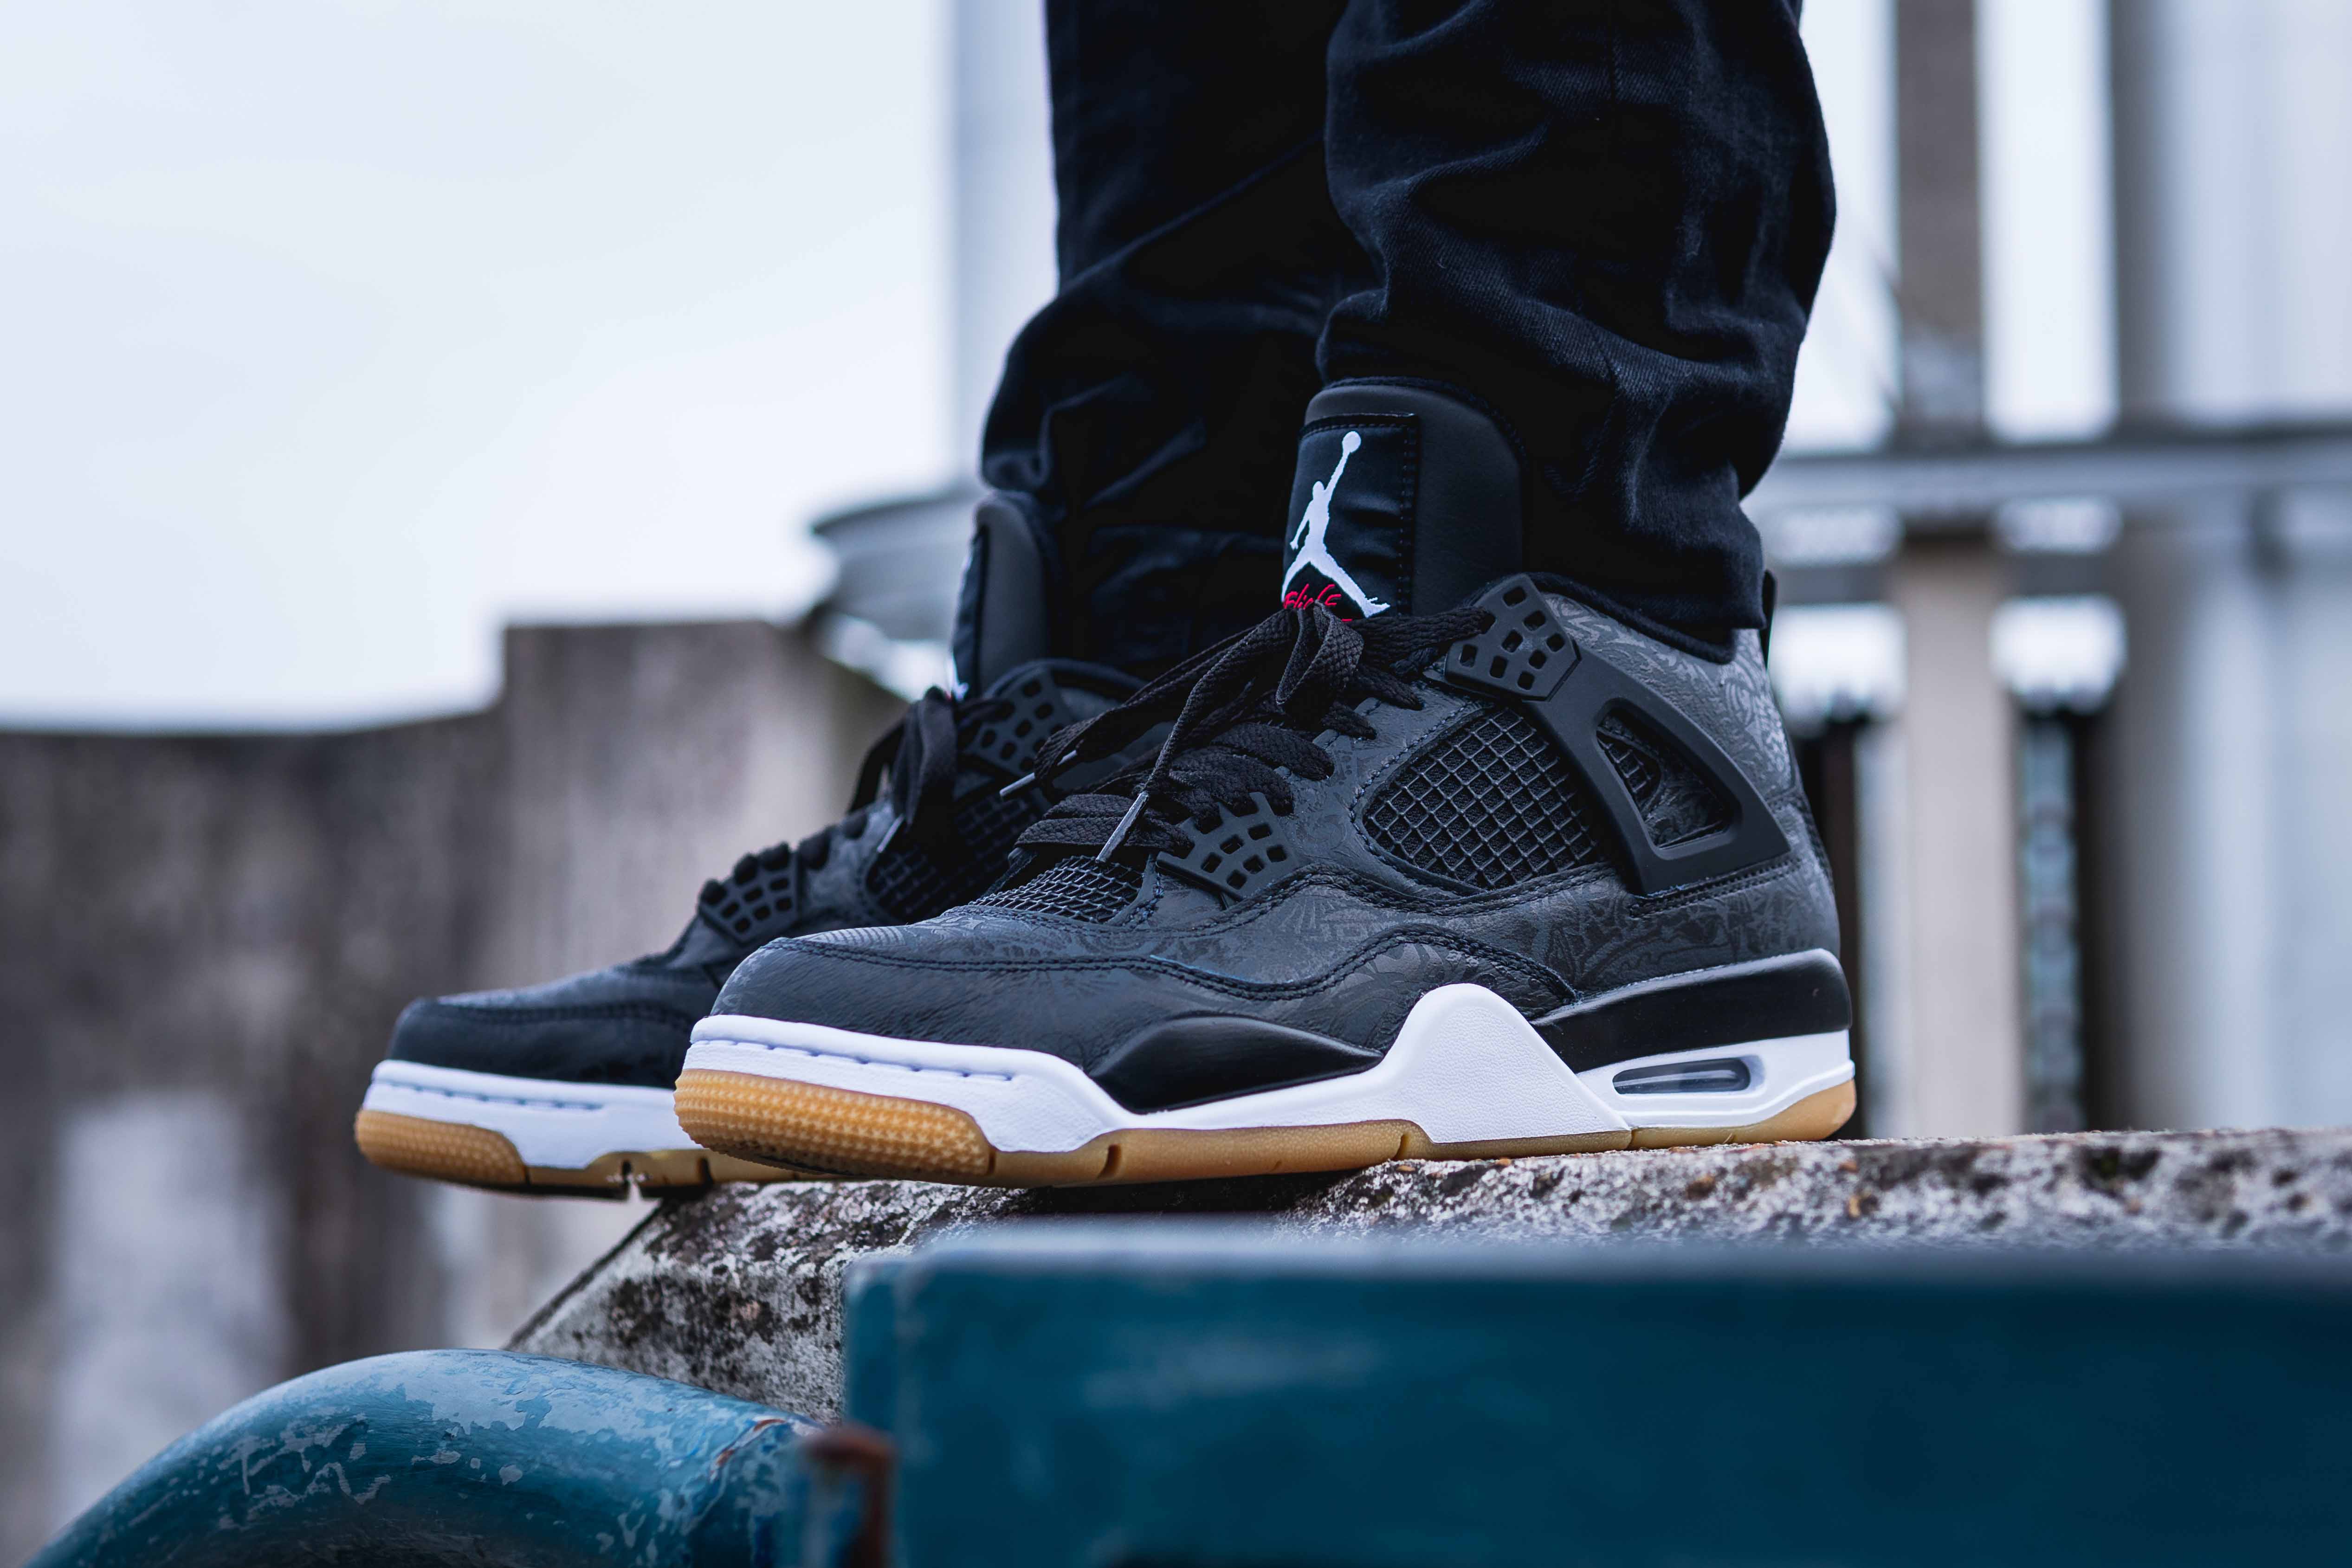 Everything You Need To Know About The Jordan 4 ‘Black Laser' | The Sole ...